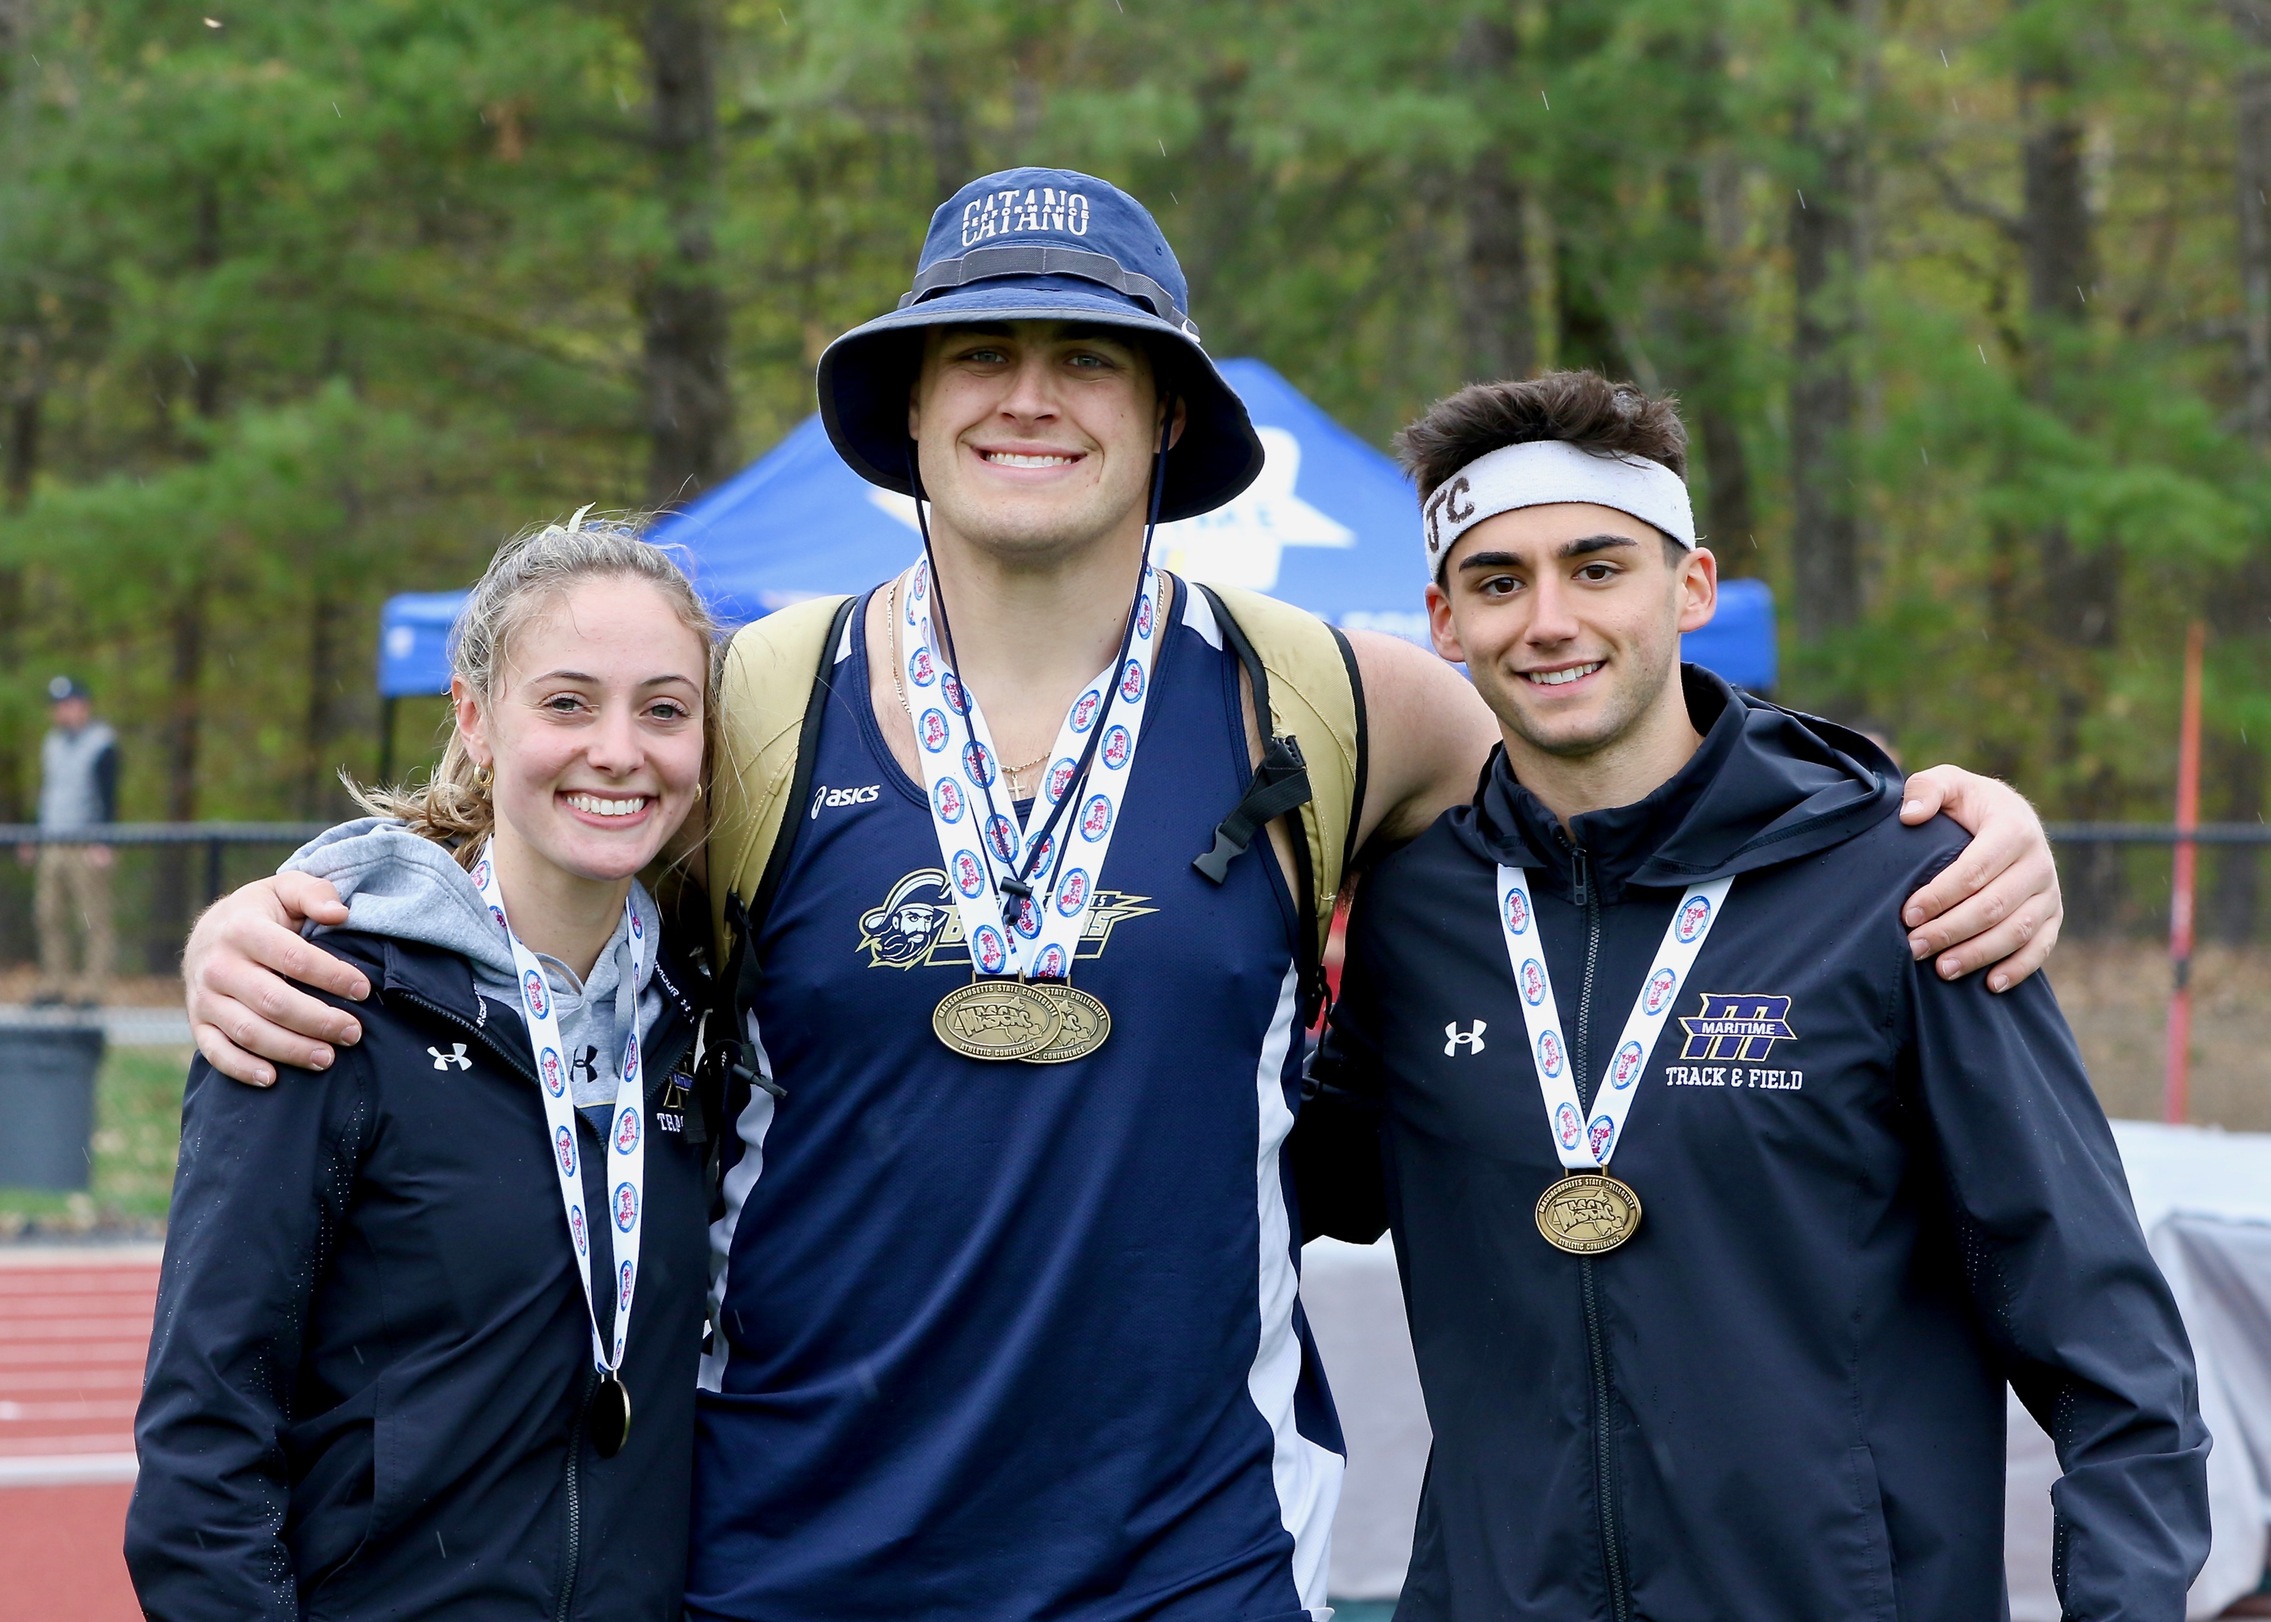 Childs, Grieco, and Rousseau Earn All-MASCAC Spots